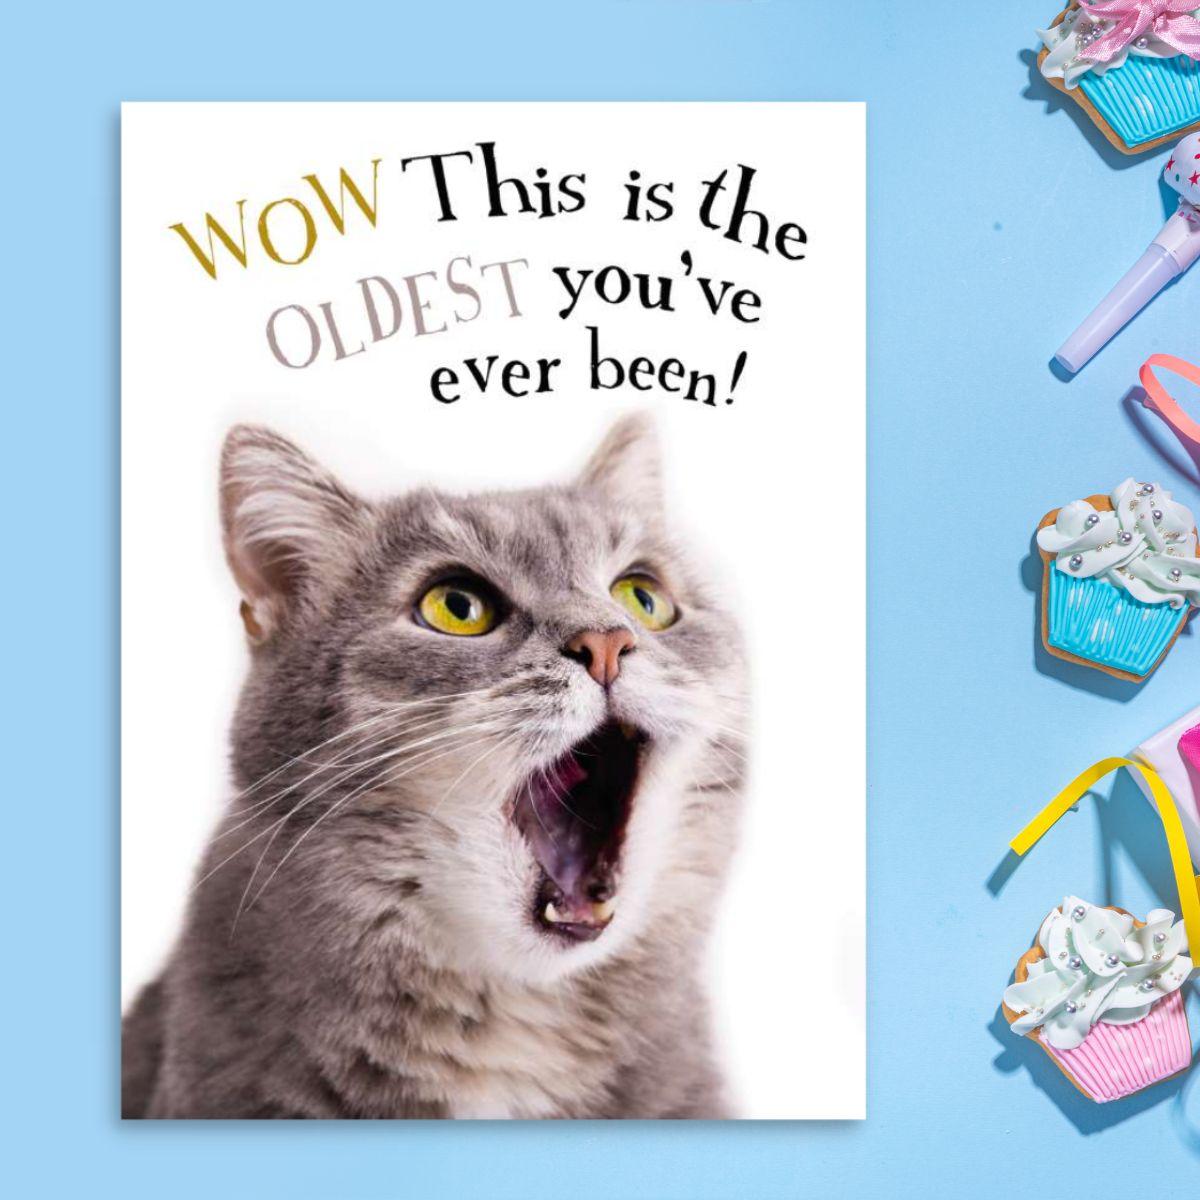 Picture This - The Oldest You've Ever Been Birthday Card